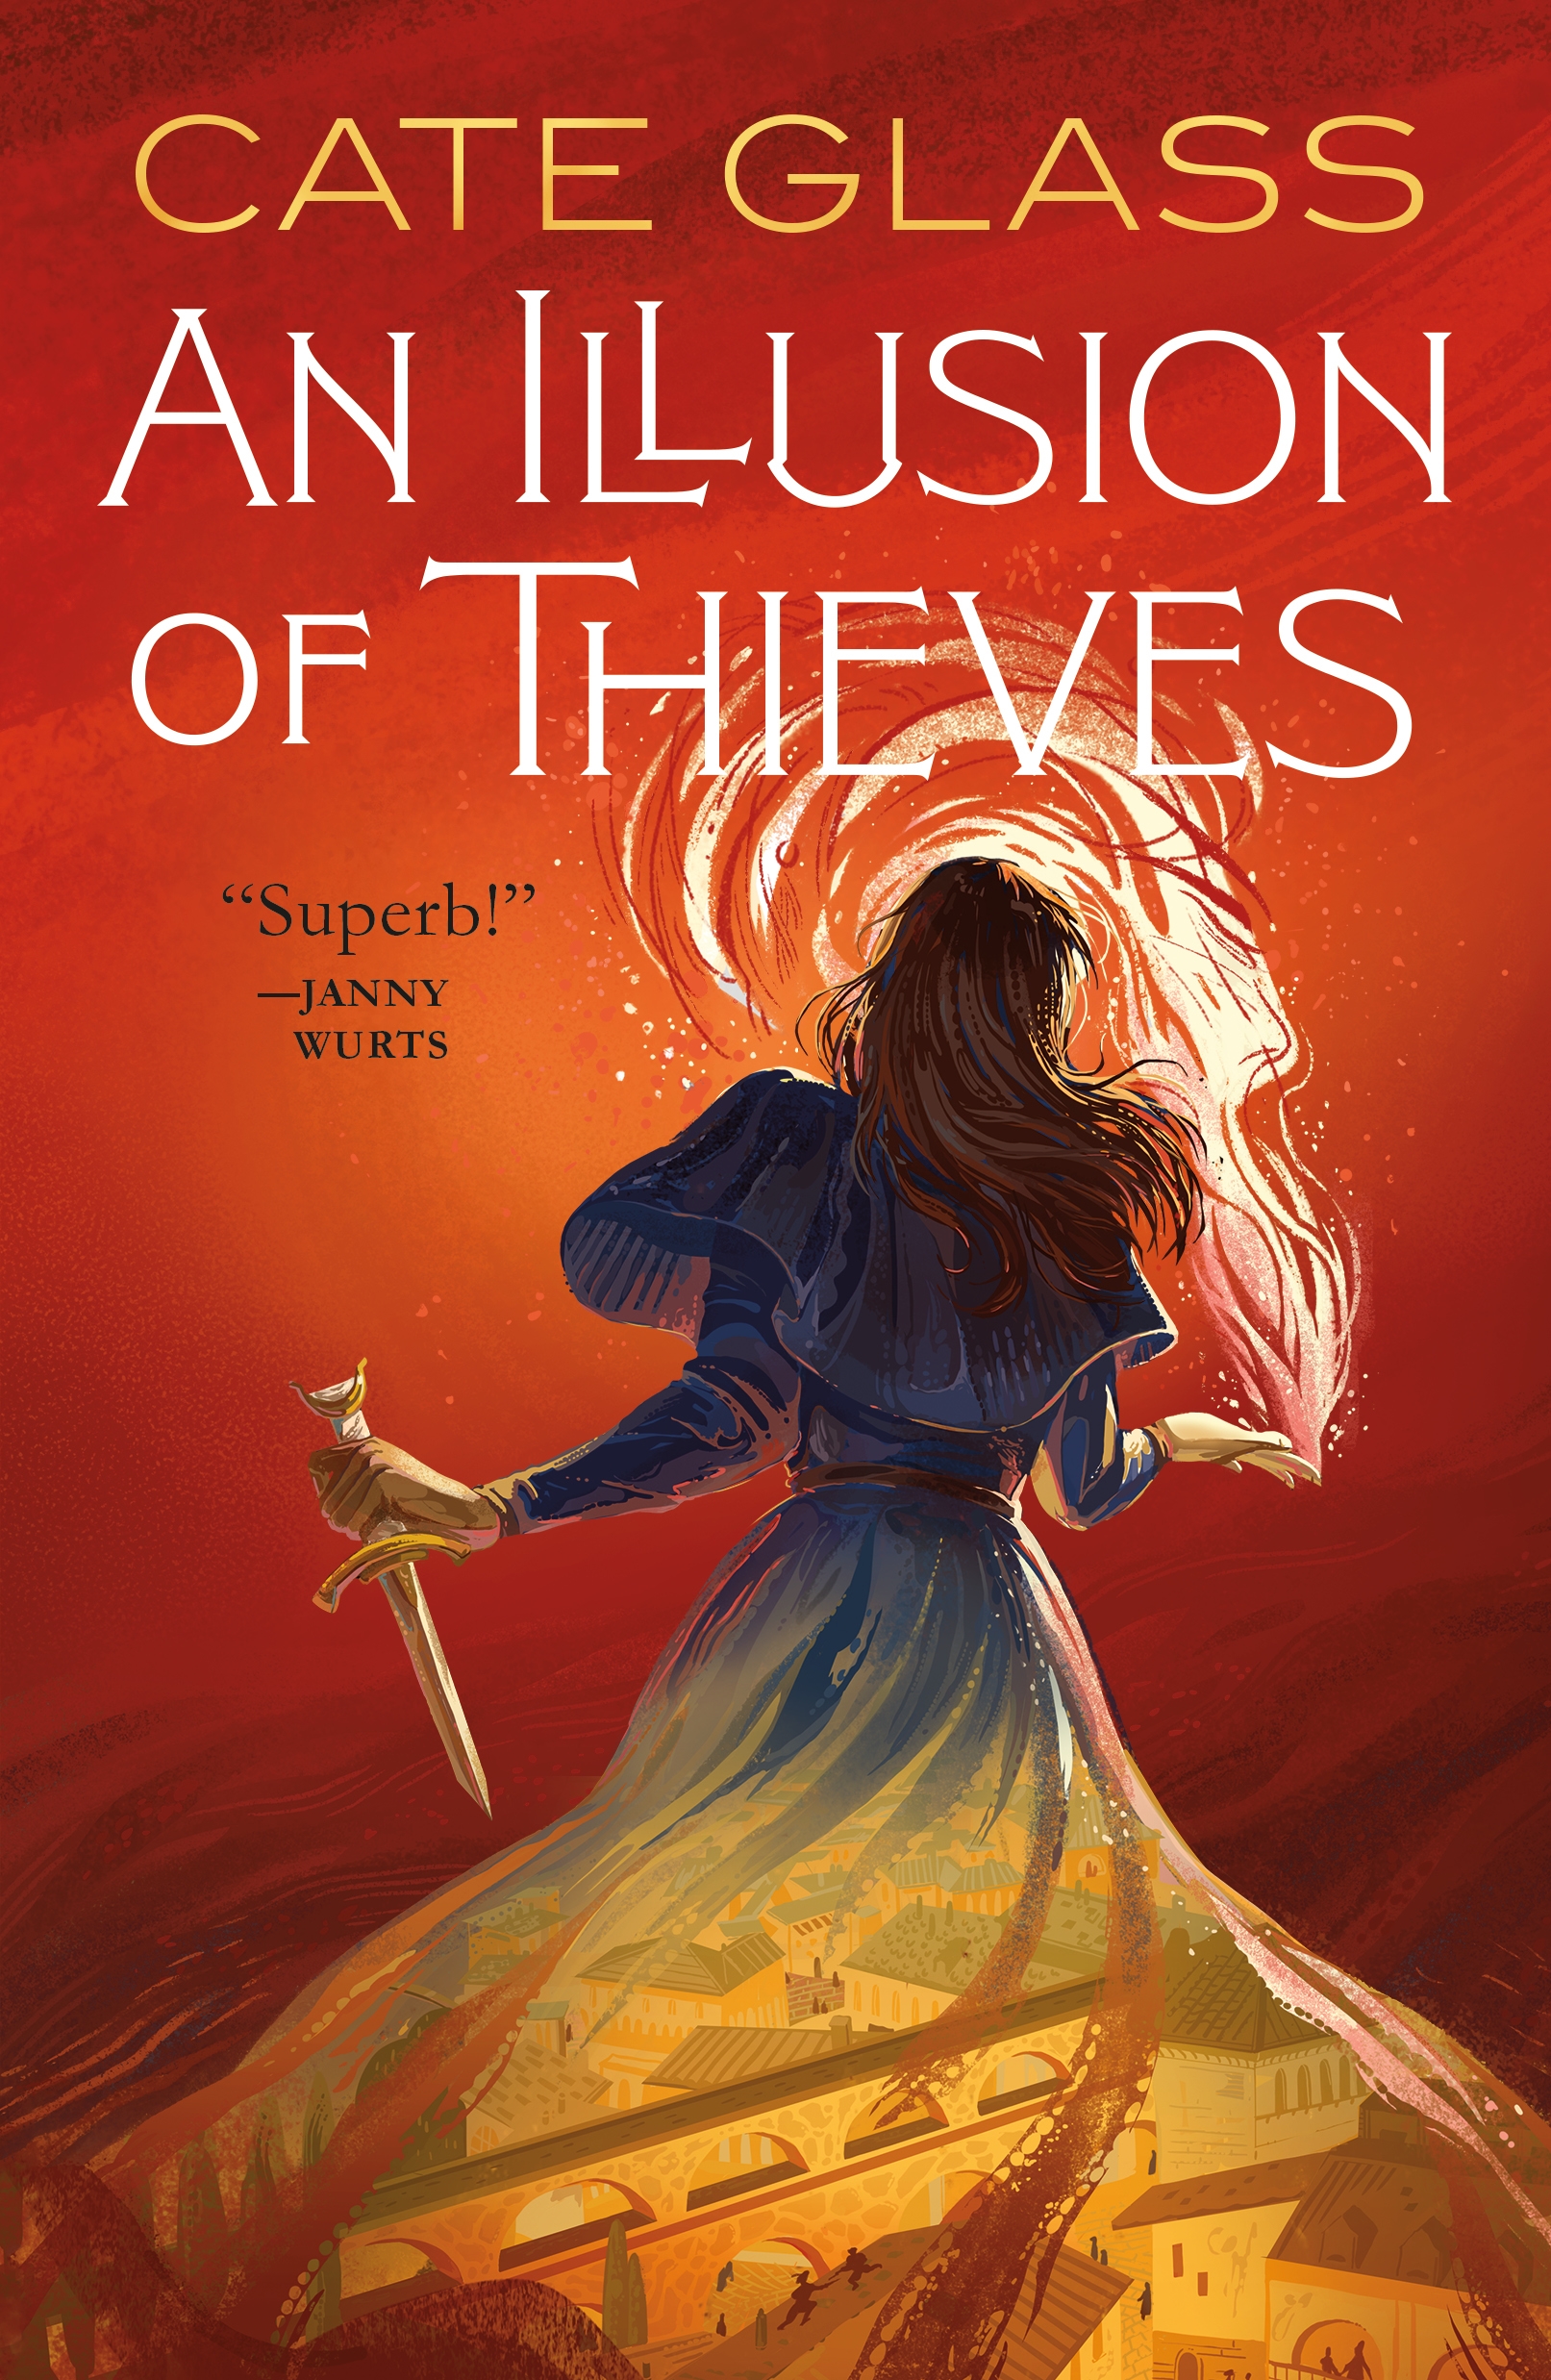 An Illusion of Thieves by Cate Glass